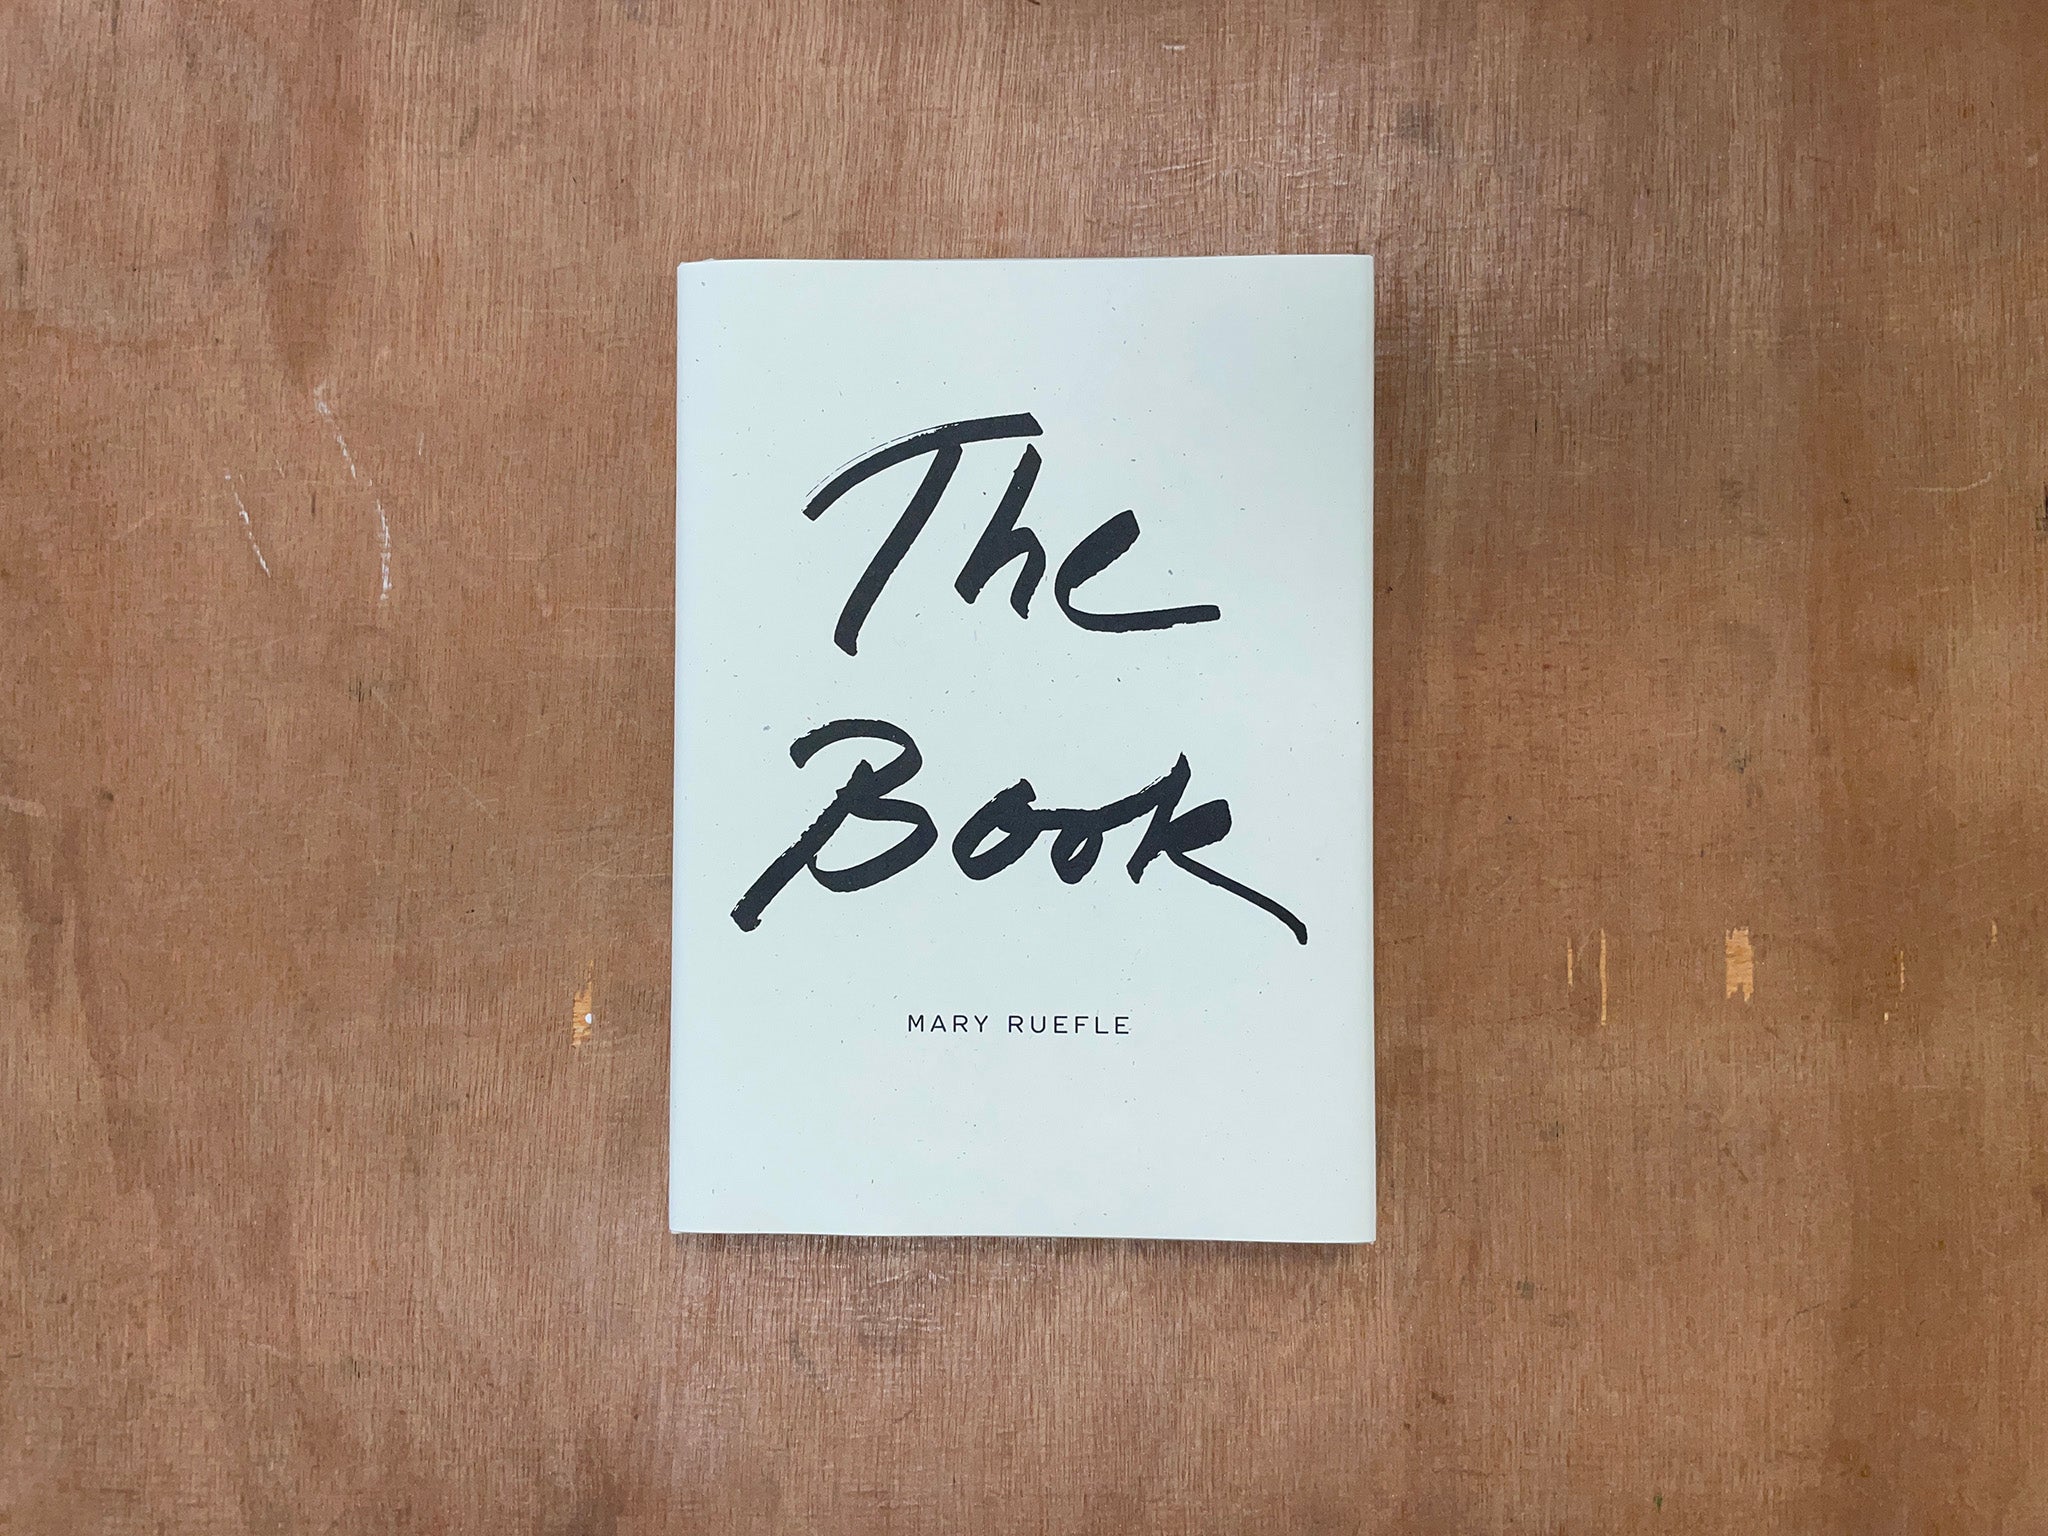 THE BOOK by Mary Ruefle